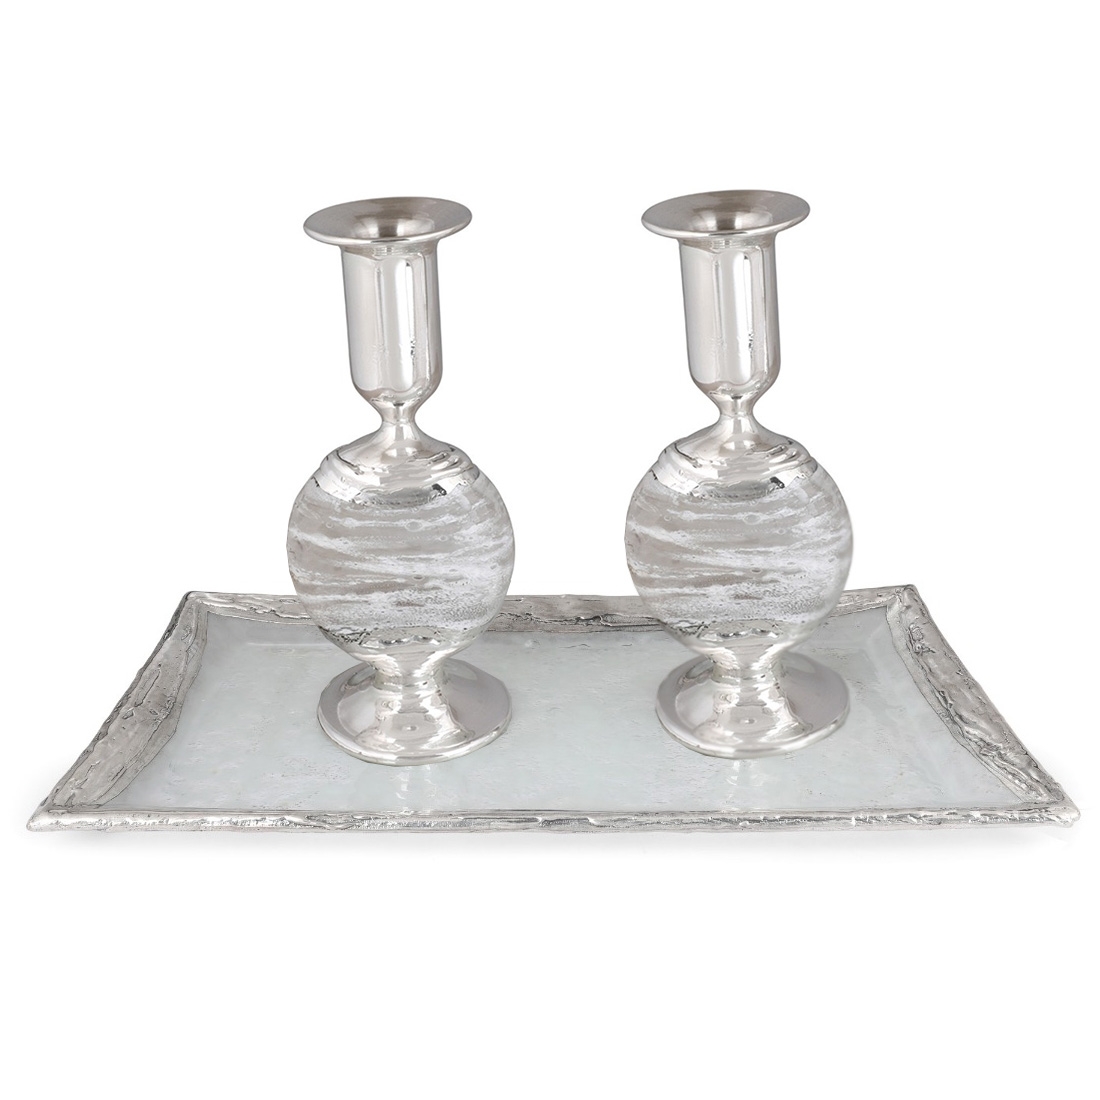 Handmade White Glass and Sterling Silver-Plated Shabbat Candlesticks - 1